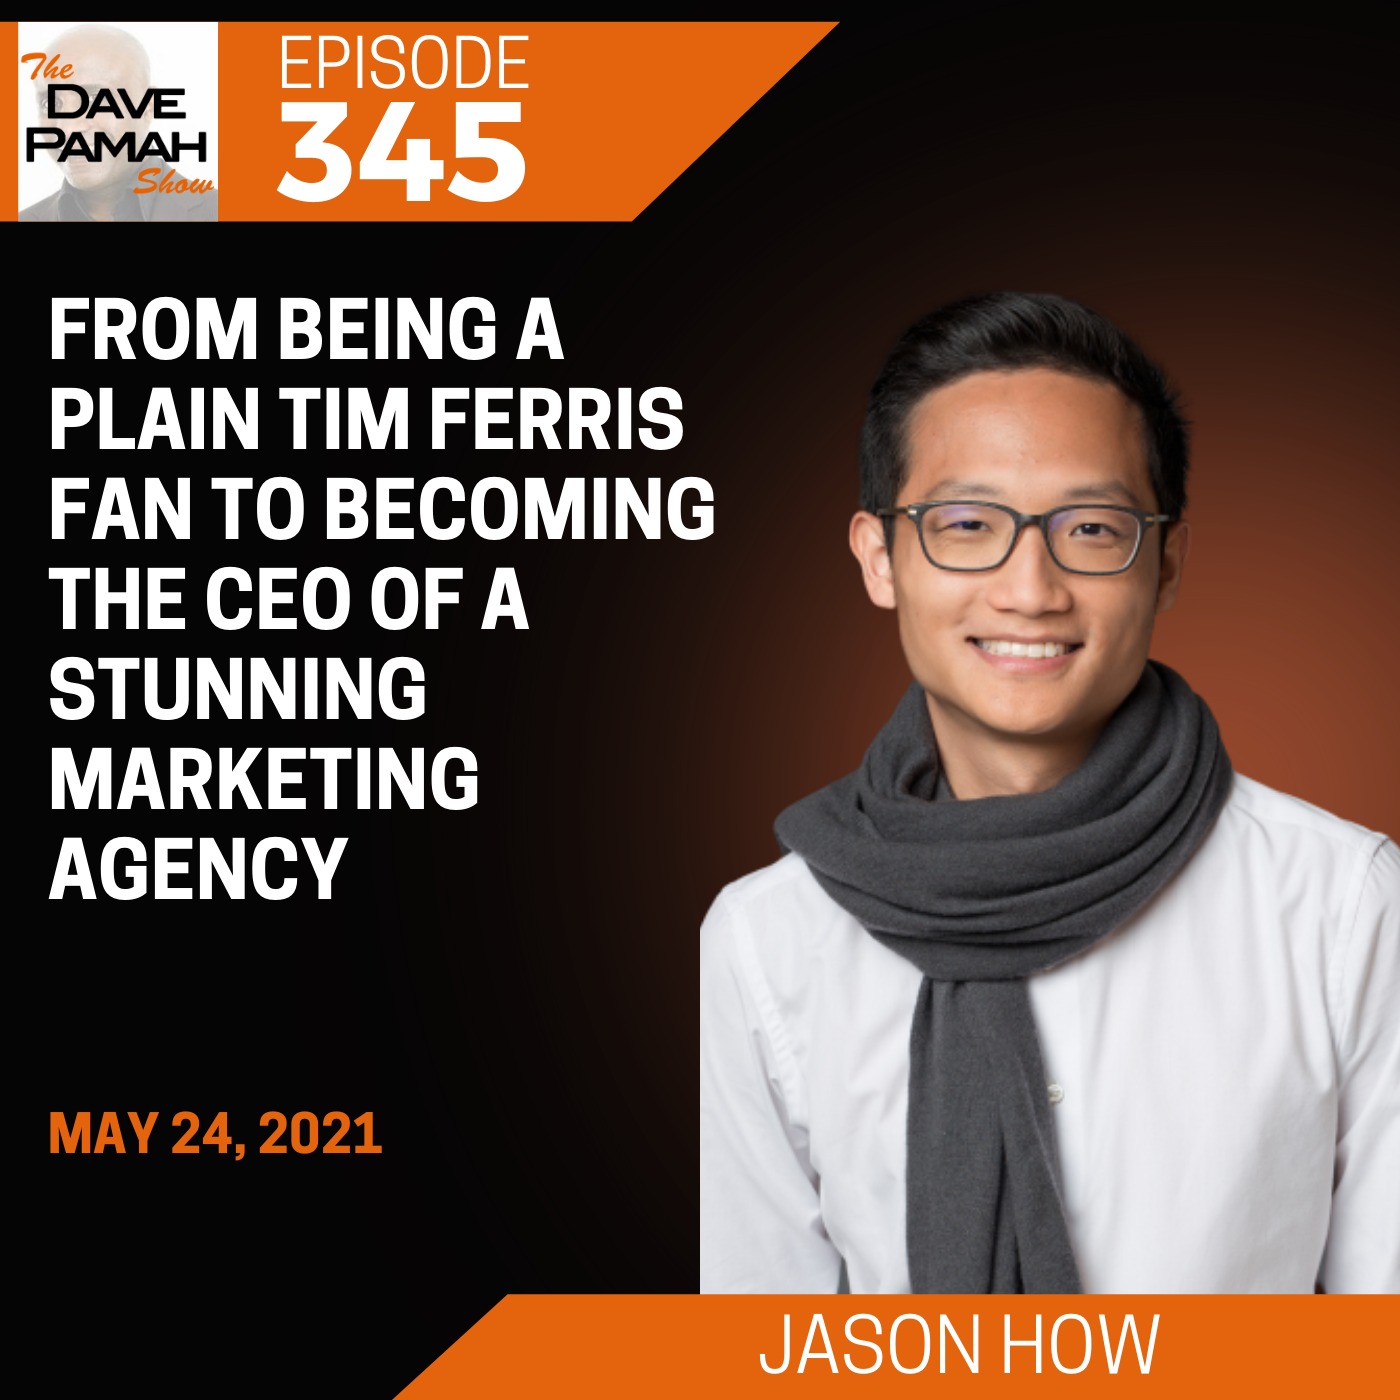 From being a plain Tim Ferris fan to becoming the CEO of a stunning marketing agency with Jason How